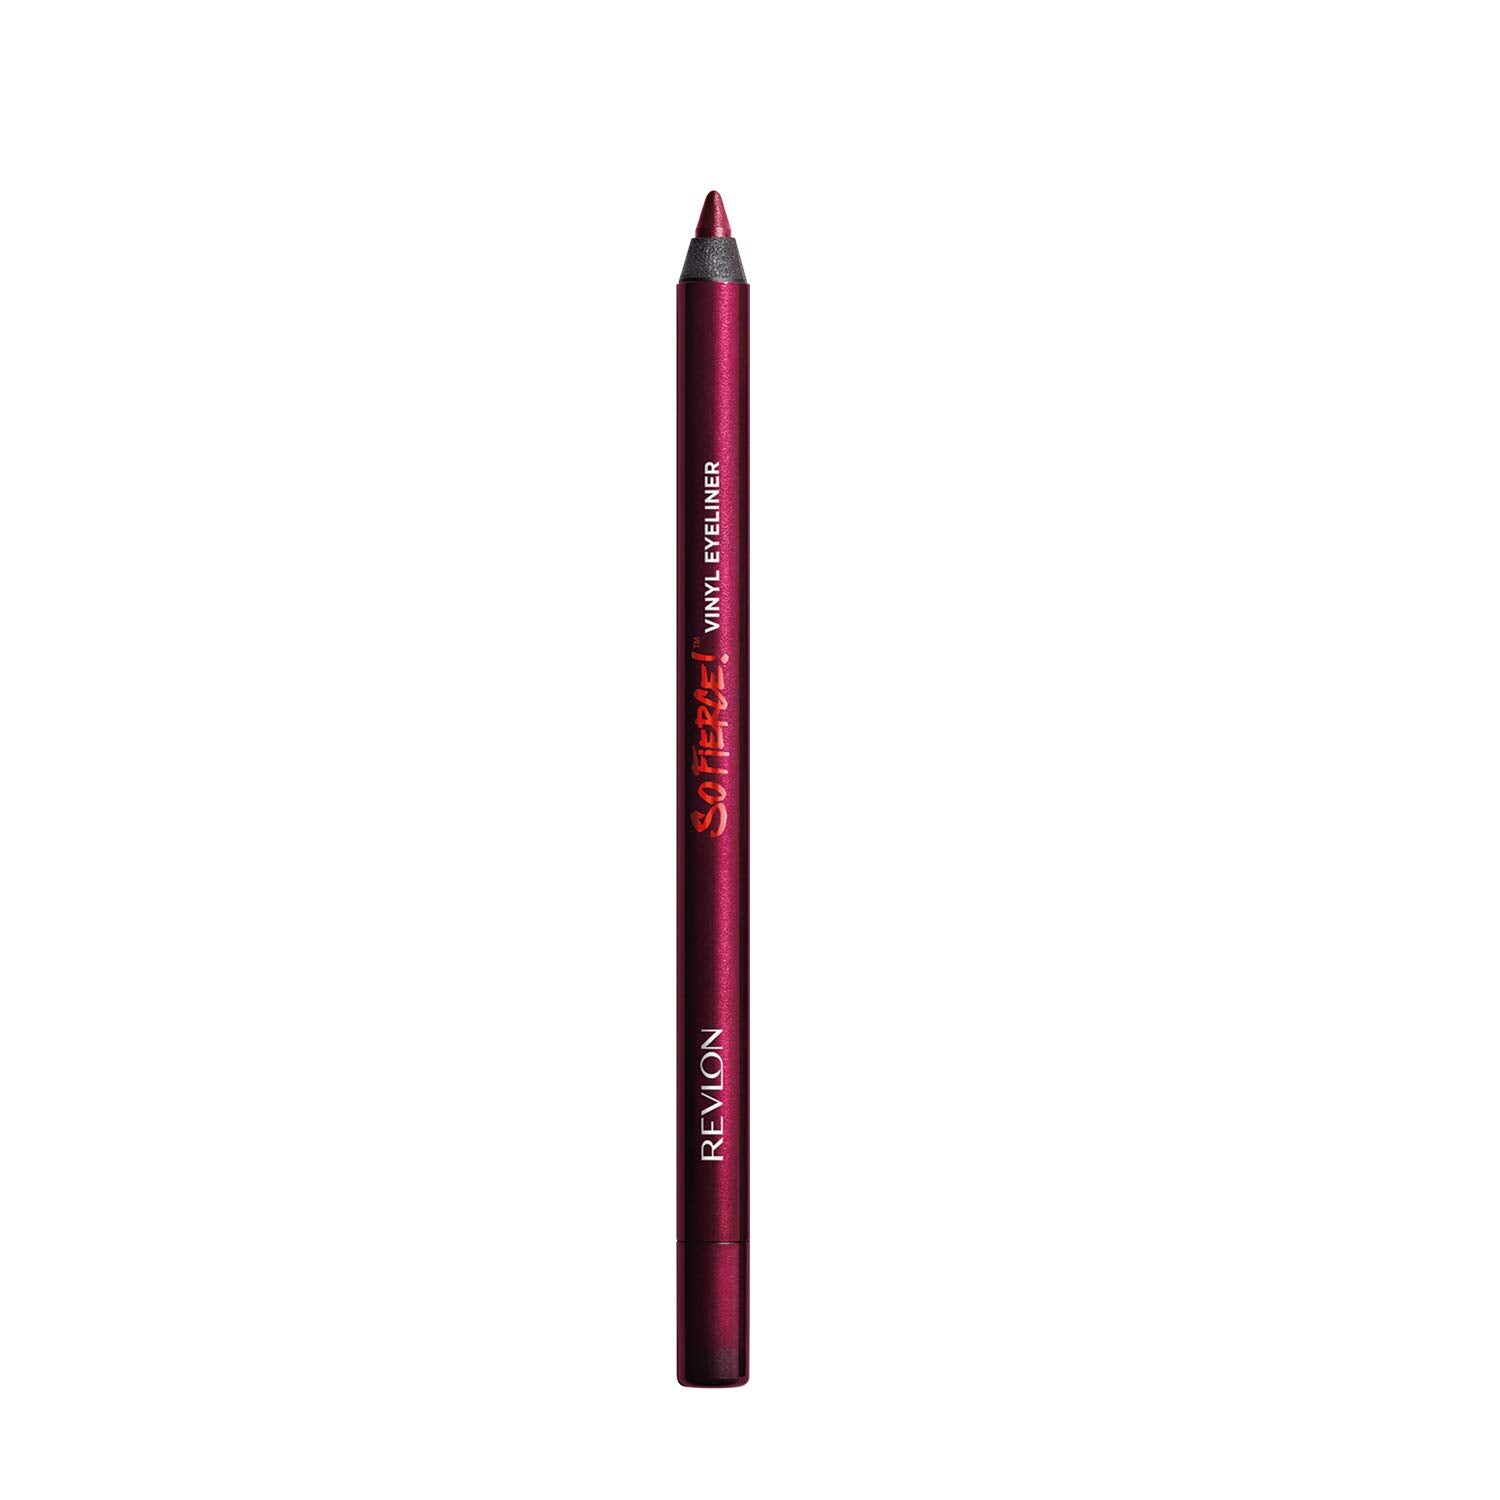 High-impact color. Waterproof, smudge-proof, lacquer-like sheen.